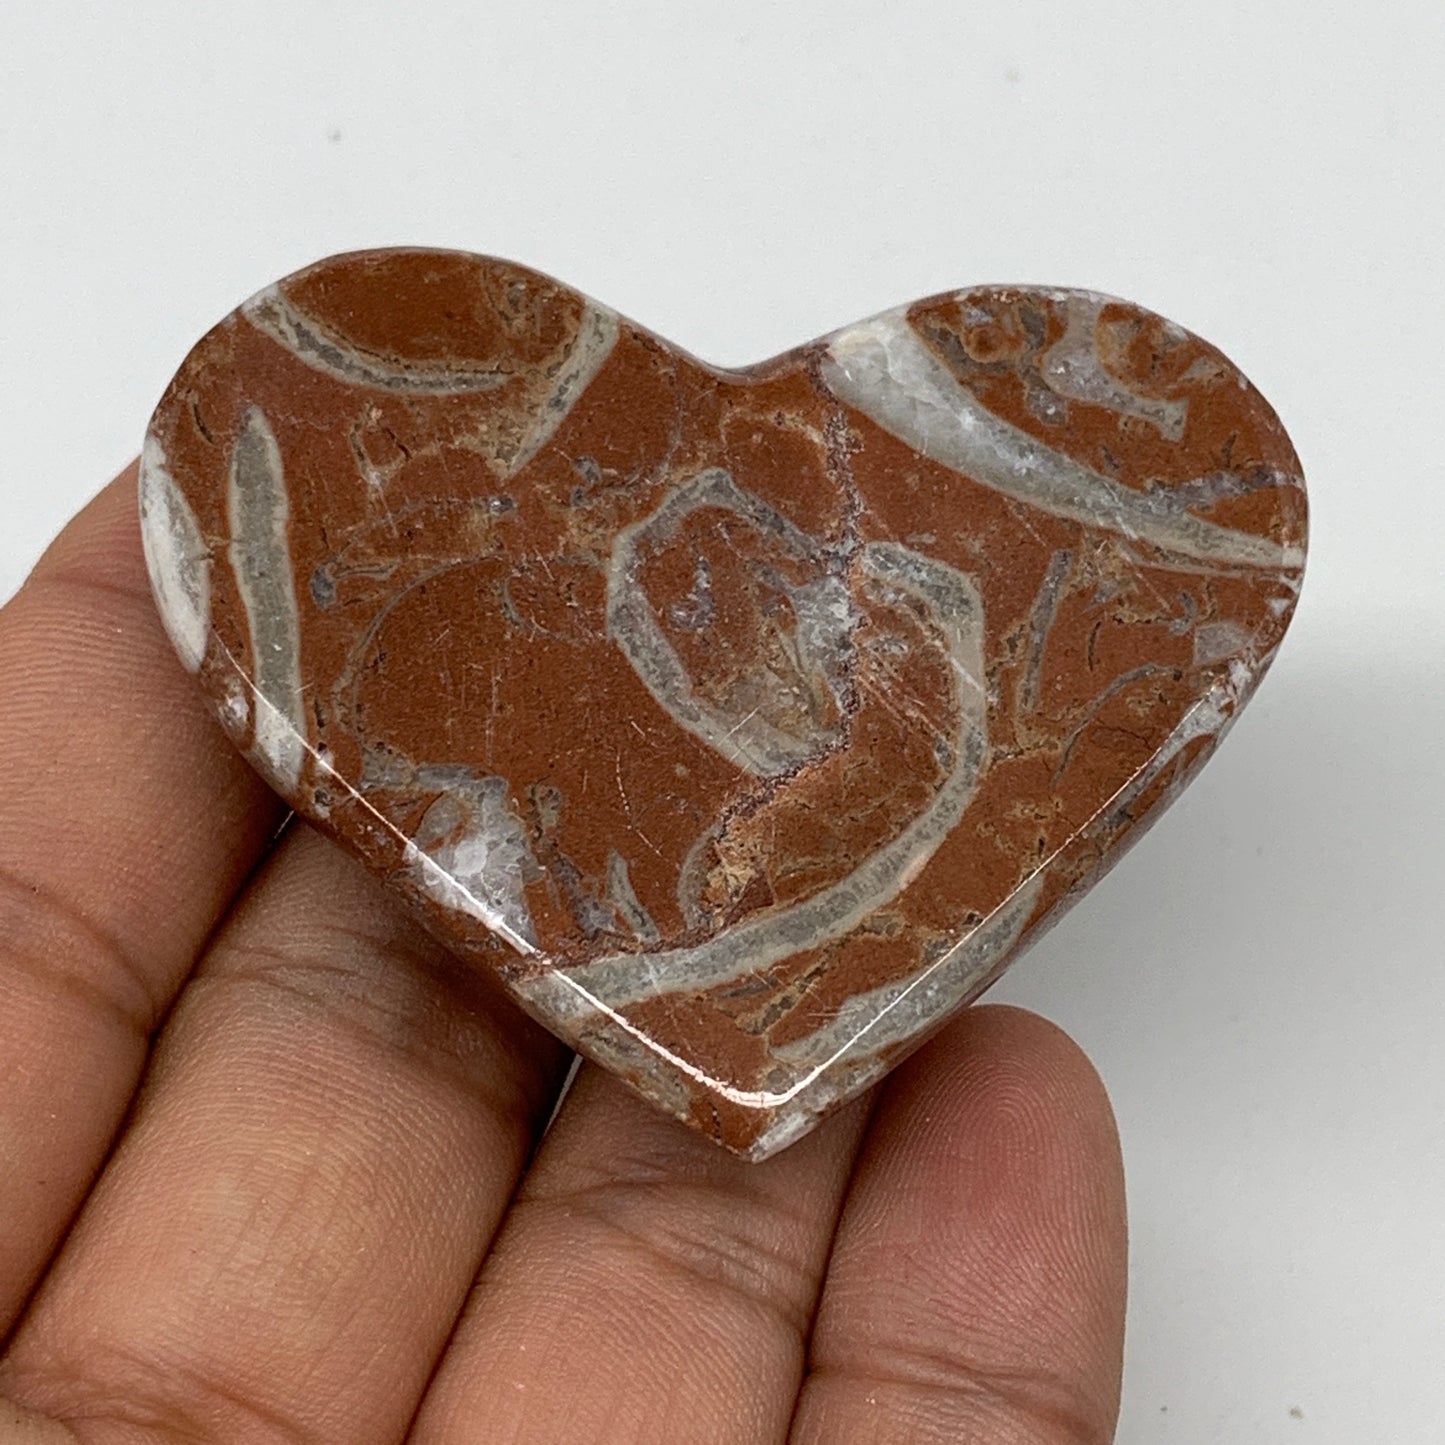 52.4g, 1.8" x 2.2"x 0.6", Natural Untreated Red Shell Fossils Half Heart @Morocc